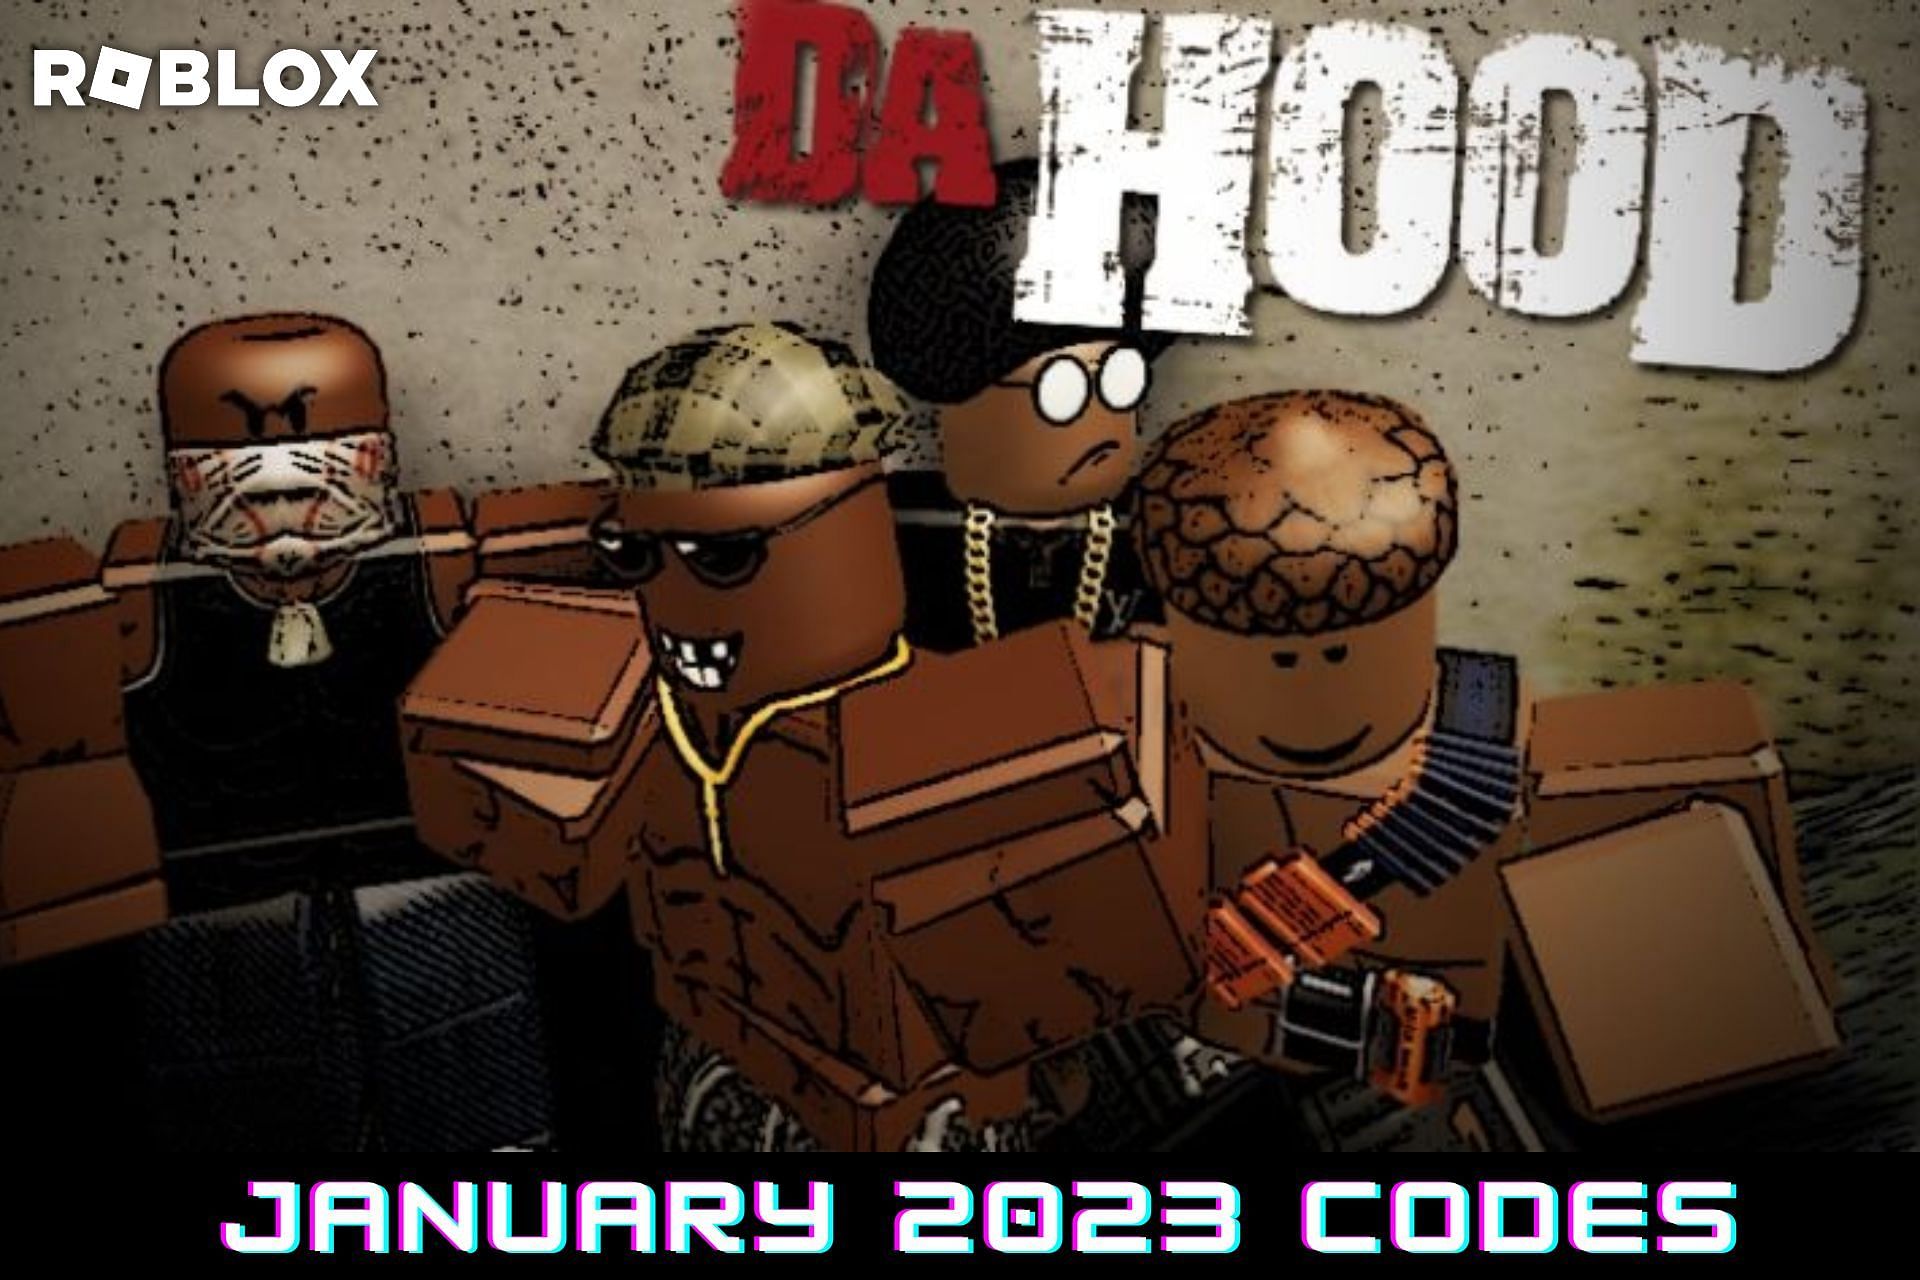 Roblox Da Hood codes for January 2023 Free Cash and Wraps